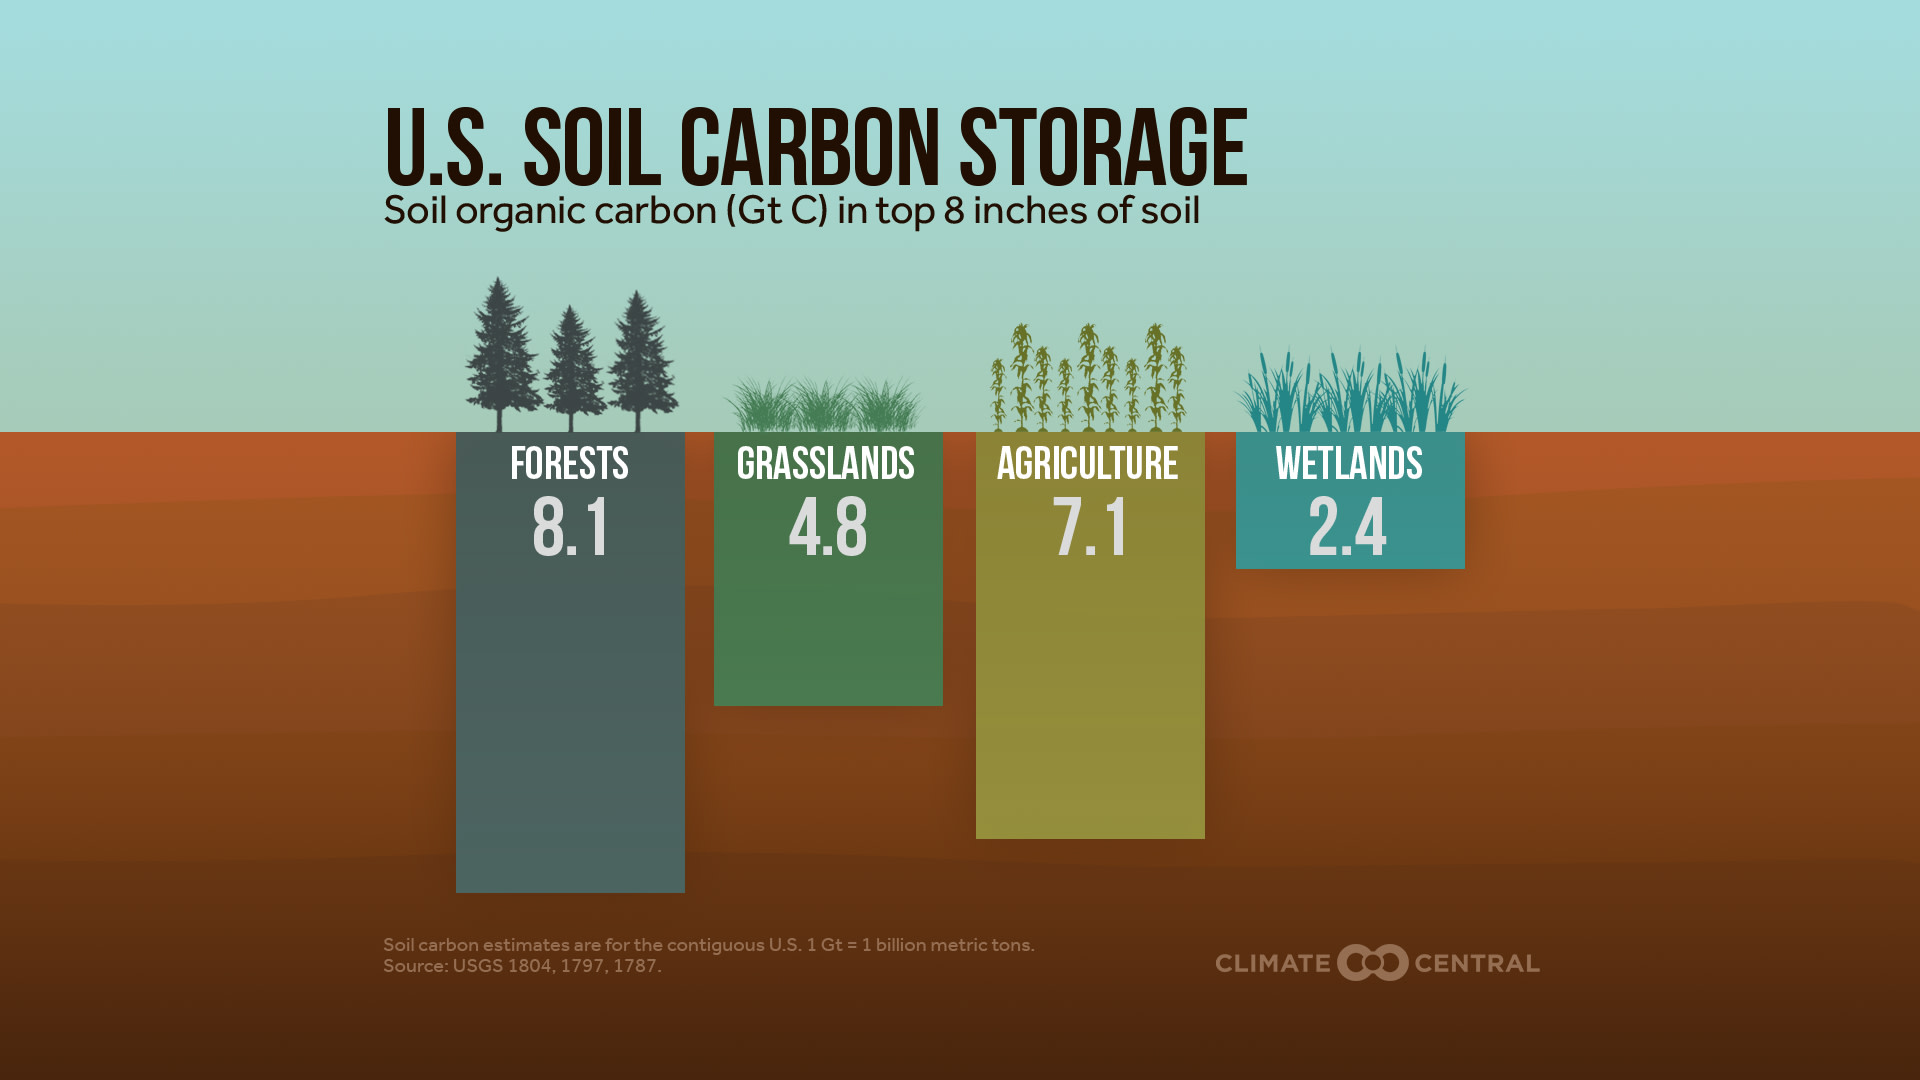 Carbon Stored in U.S. Soils